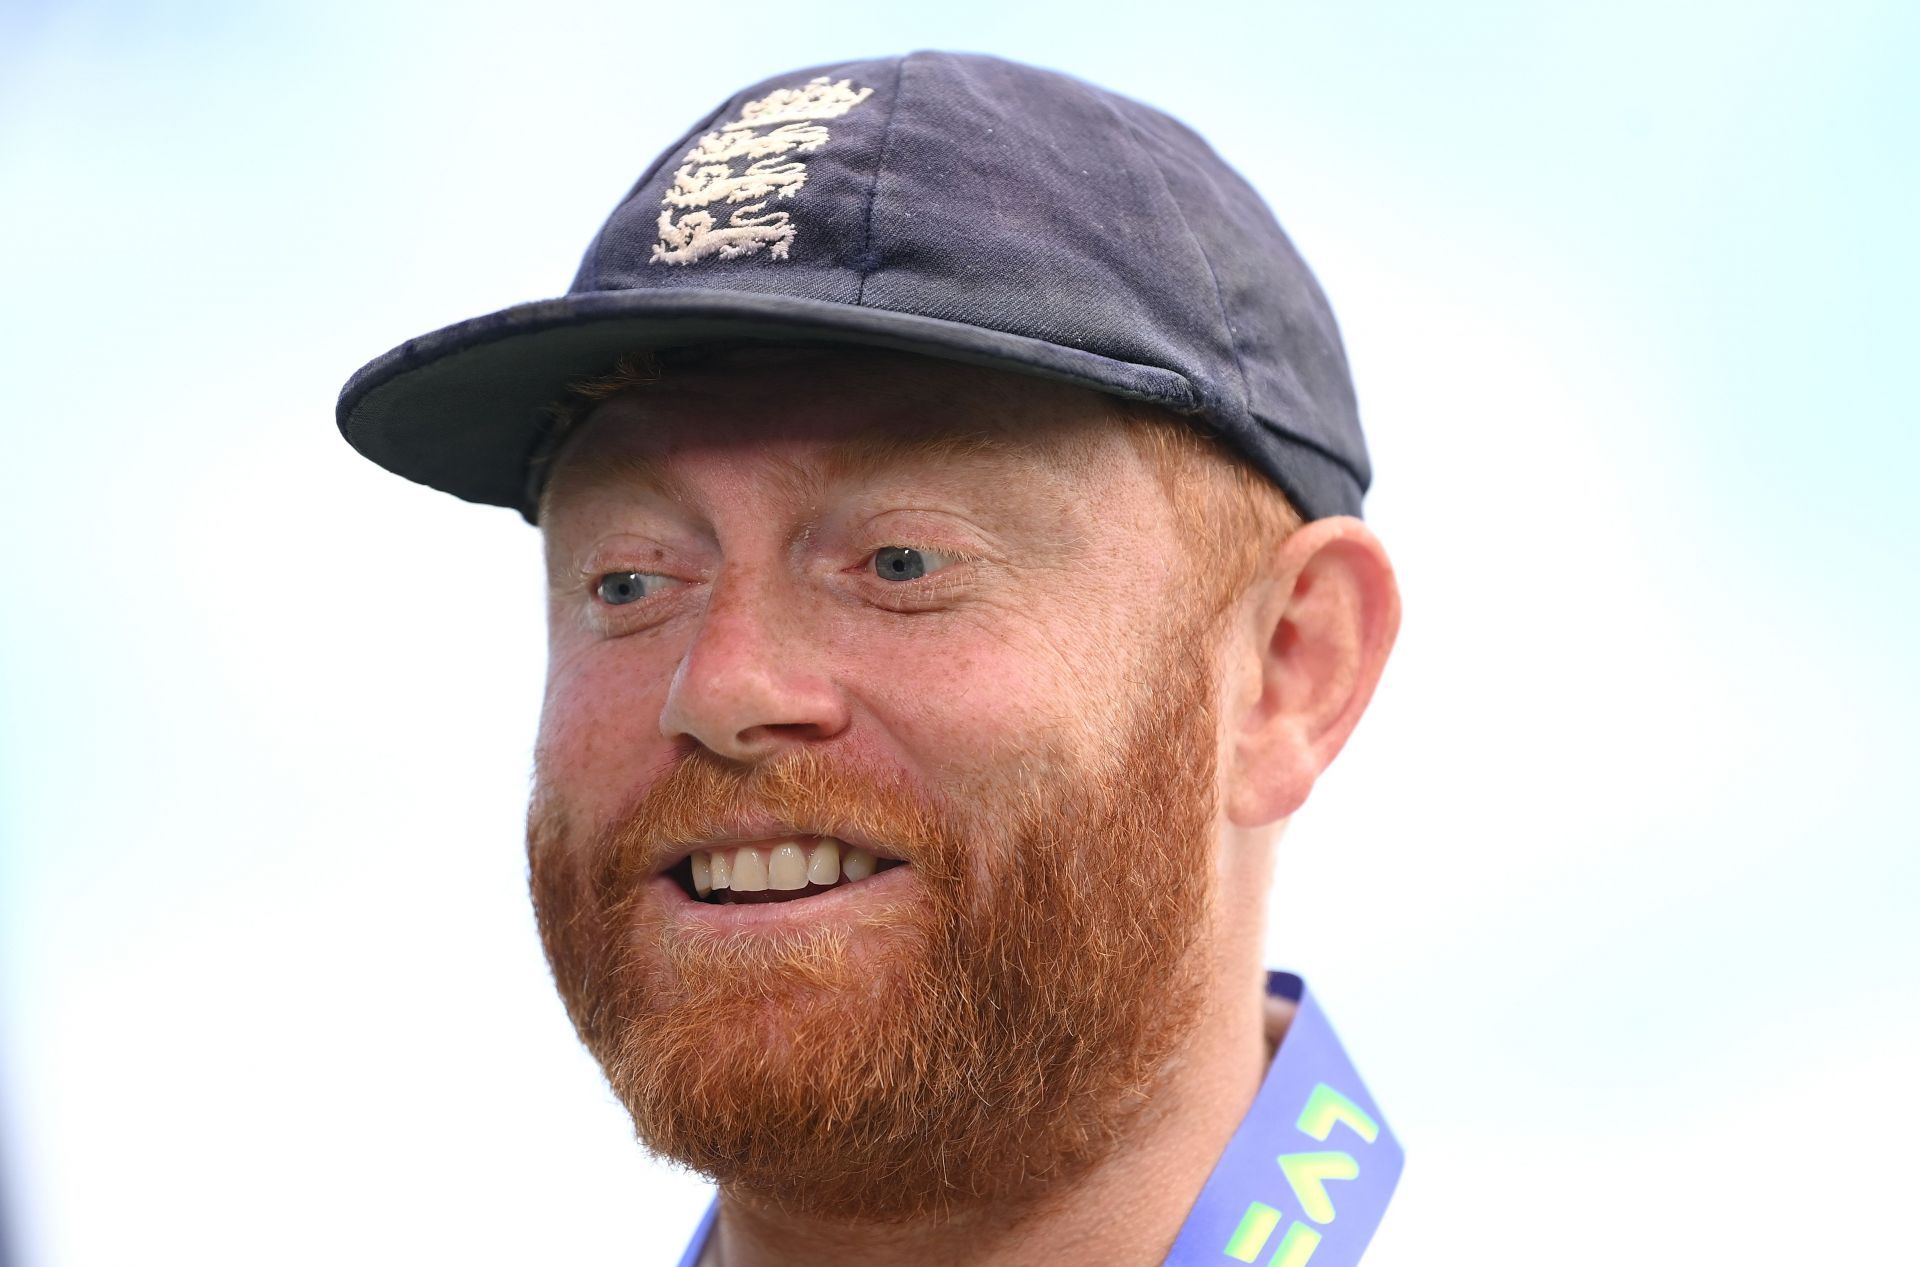 Jonny Bairstow earned the Player of the Match award against India. (Credits: Getty)